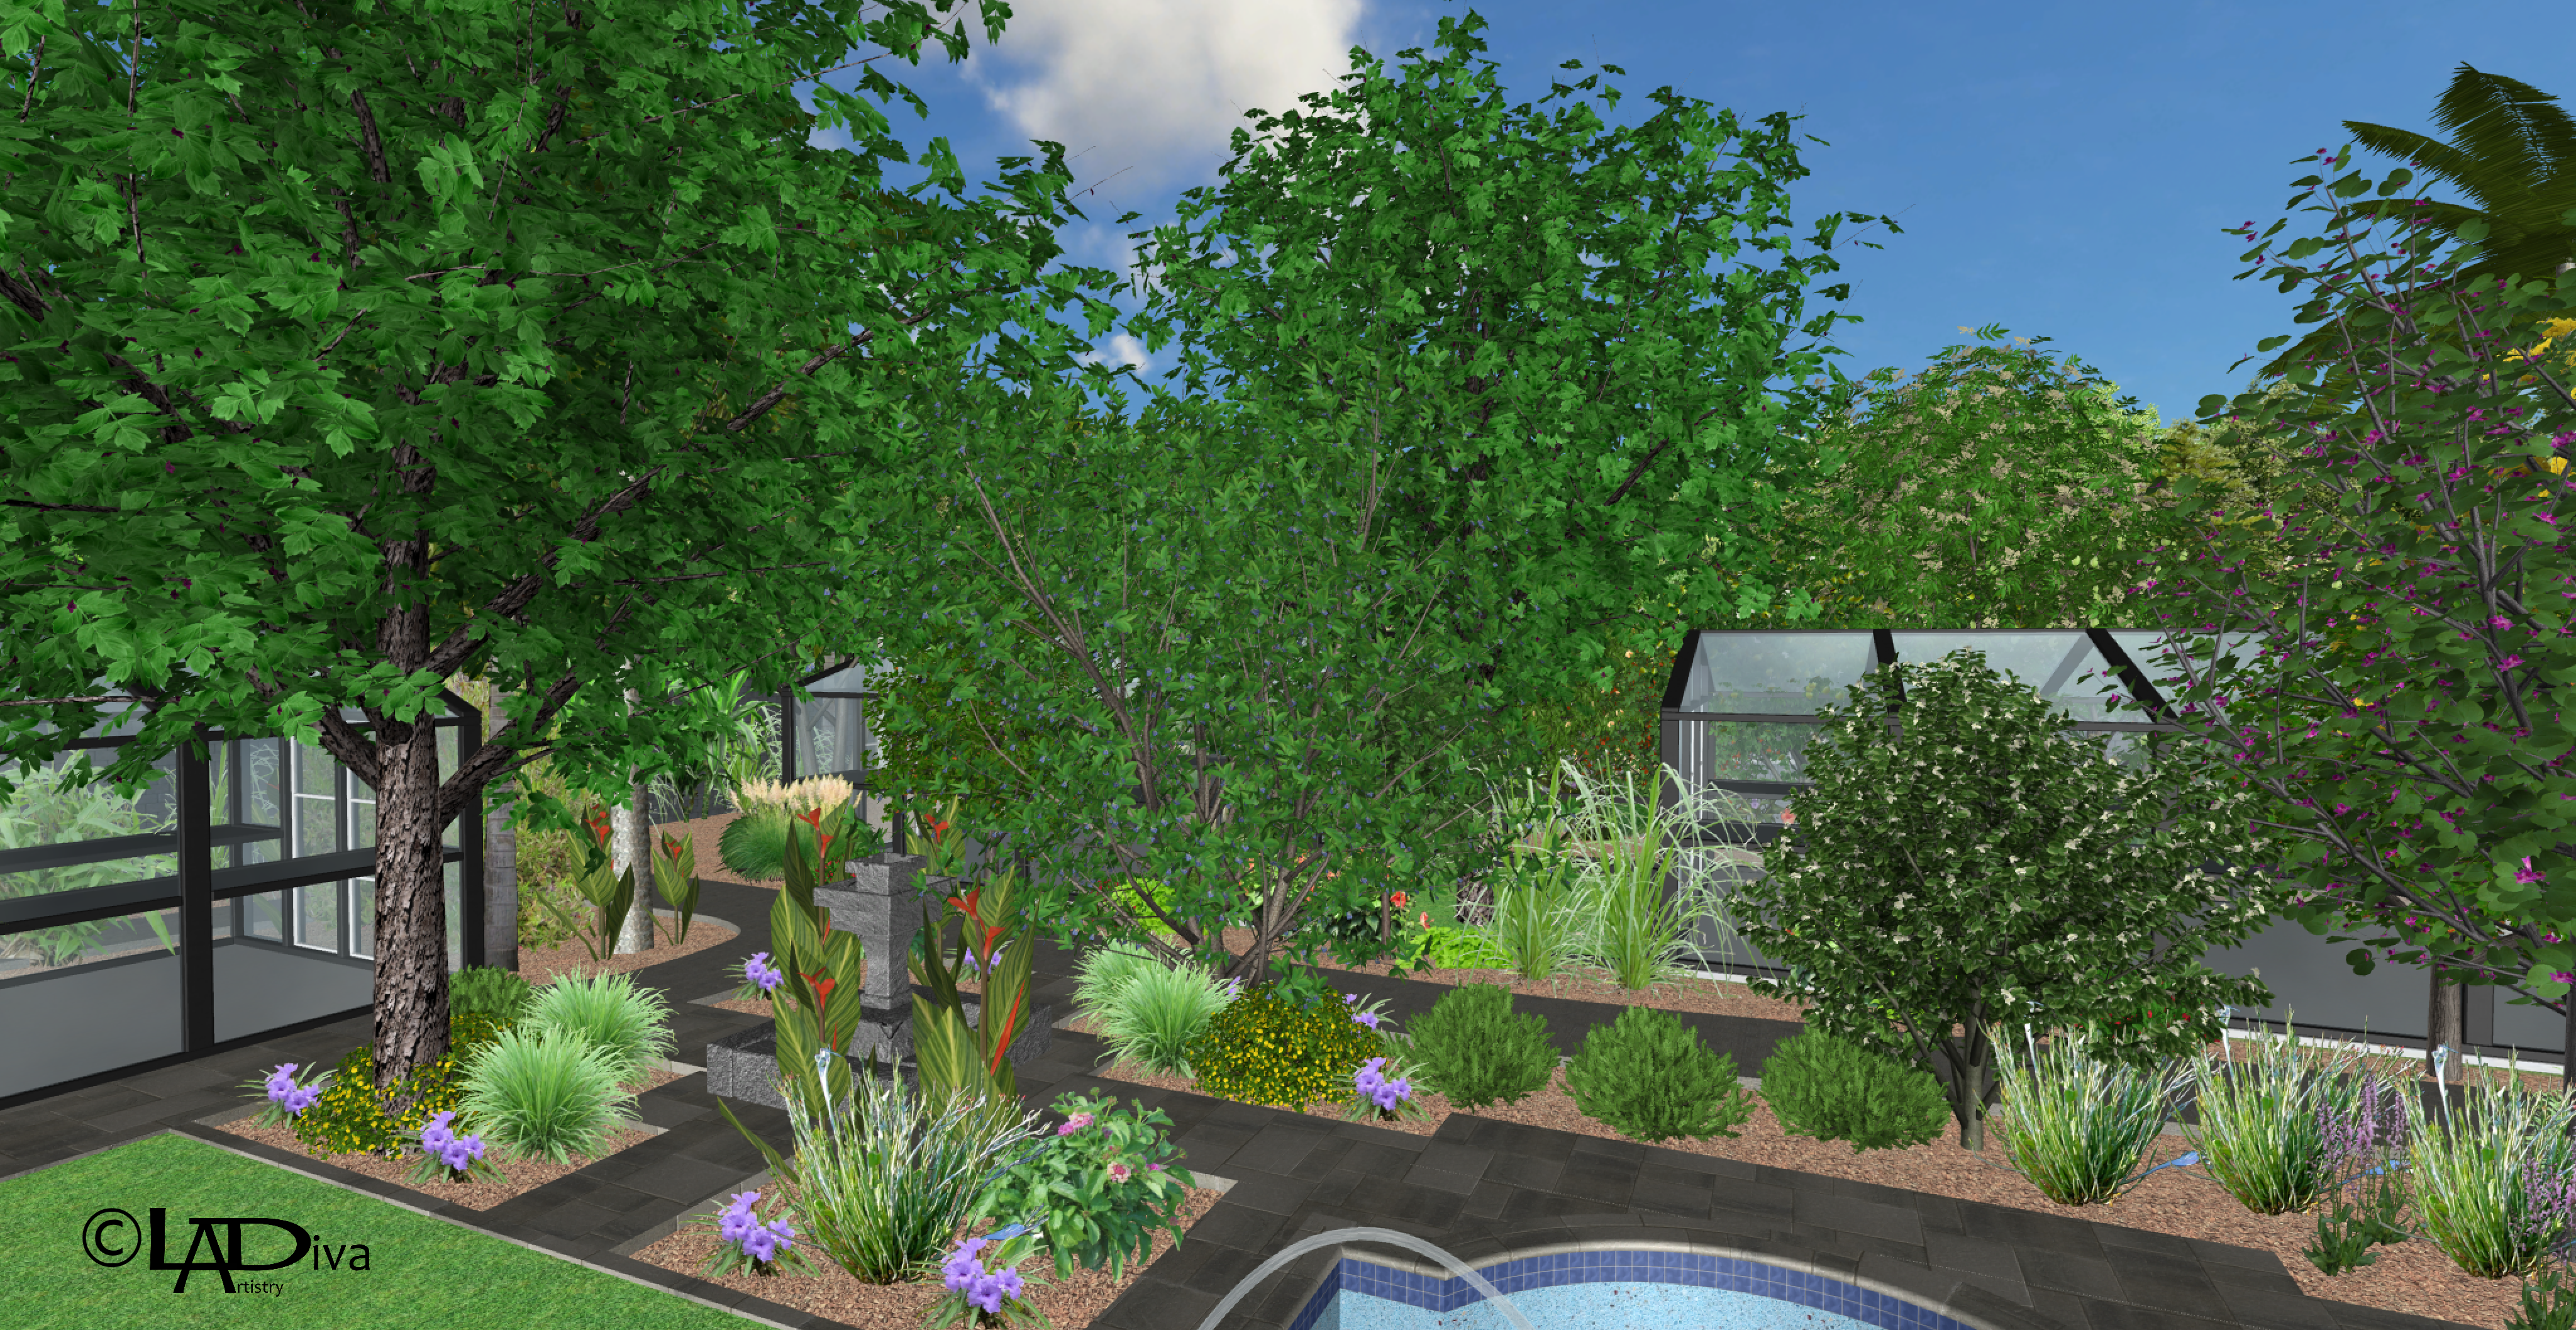 Asian Zen Garden & Animal Sanctuary with New Pool Build - Phoenix, AZ ©LADiva Artistry Landscape Design Solutions, specializing in edible & tropical garden design in Gilbert, AZ. Featuring Custom 2D Color Master Landscape Design Plans and 3D Virtual Walkthrough Tours. Cultivating beautiful, productive oases in the greater Phoenix, Arizona area showcasing tropical trees, fruit trees, edible plants & herbs in low maintenance, stunning gardens.